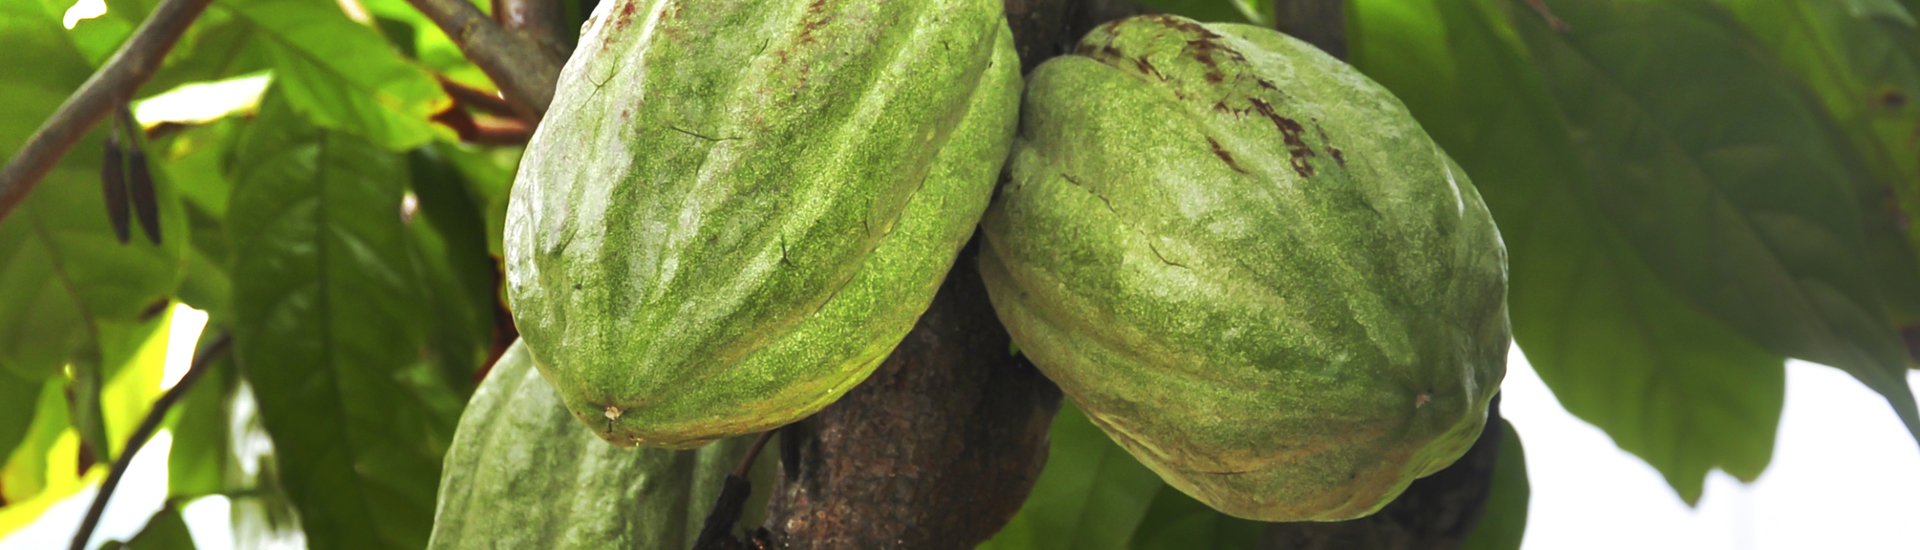 Cocoa pods growing on tree